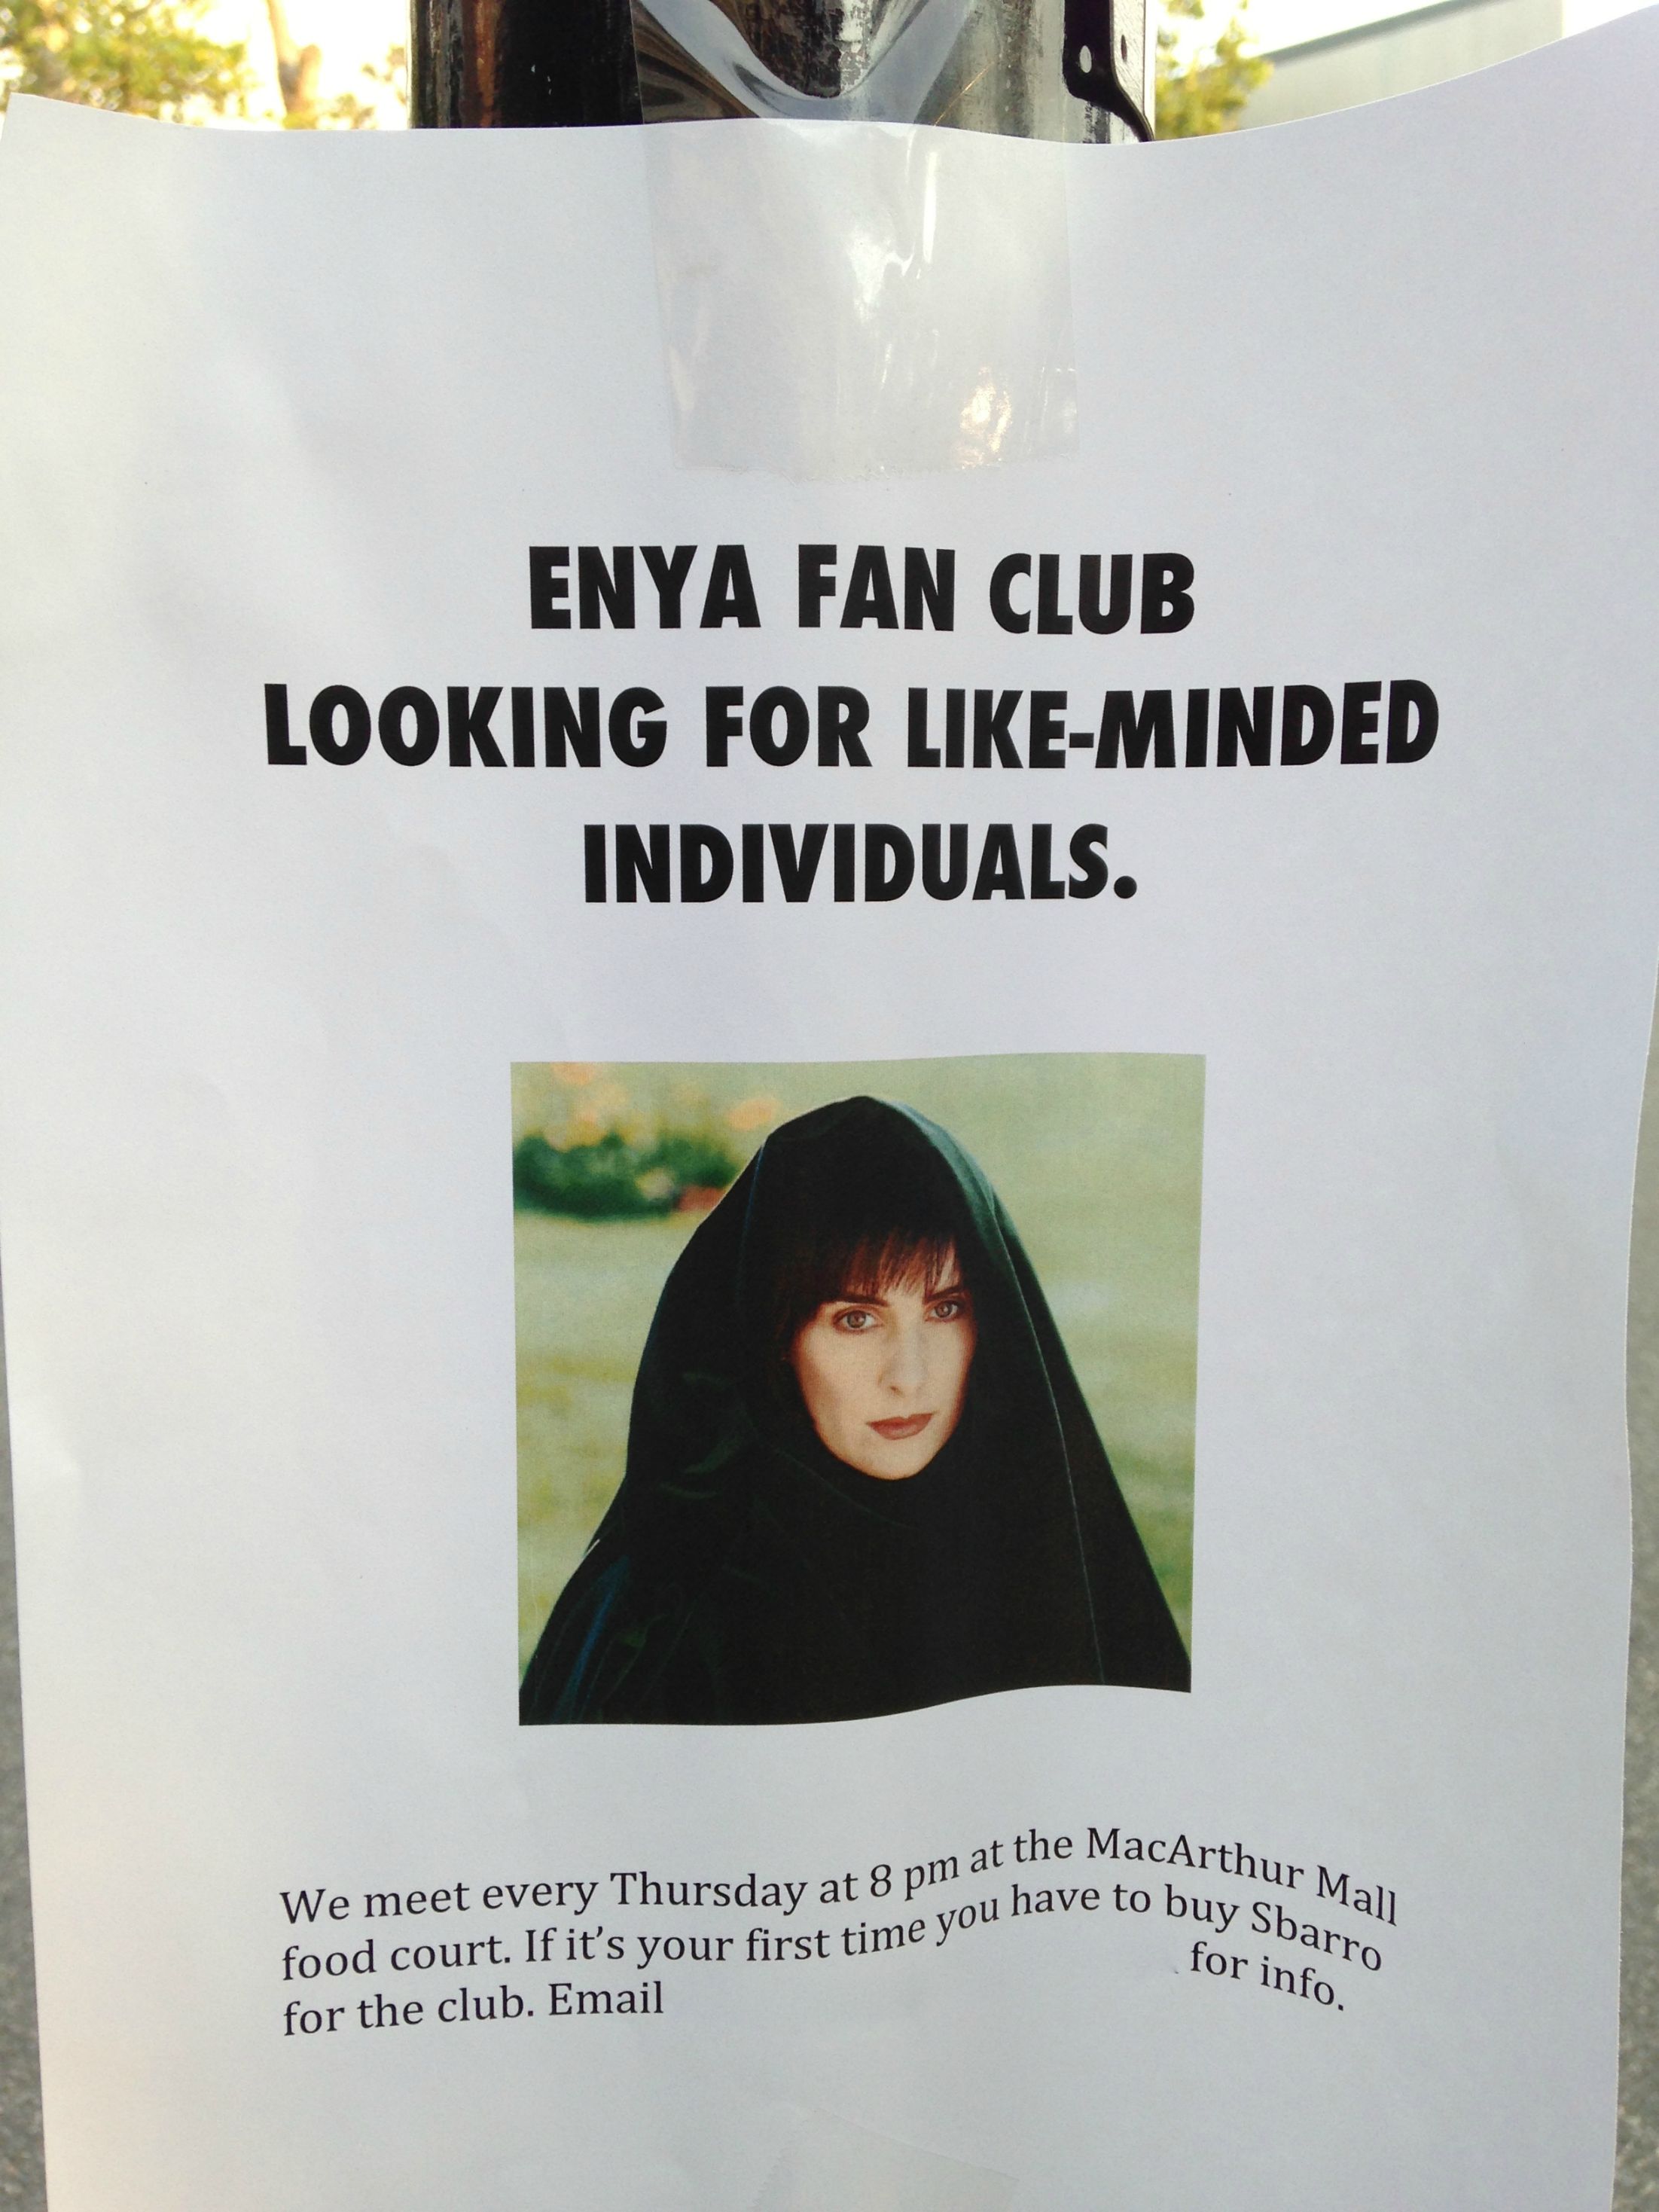 Enya fan club looking for like-minded individuals.